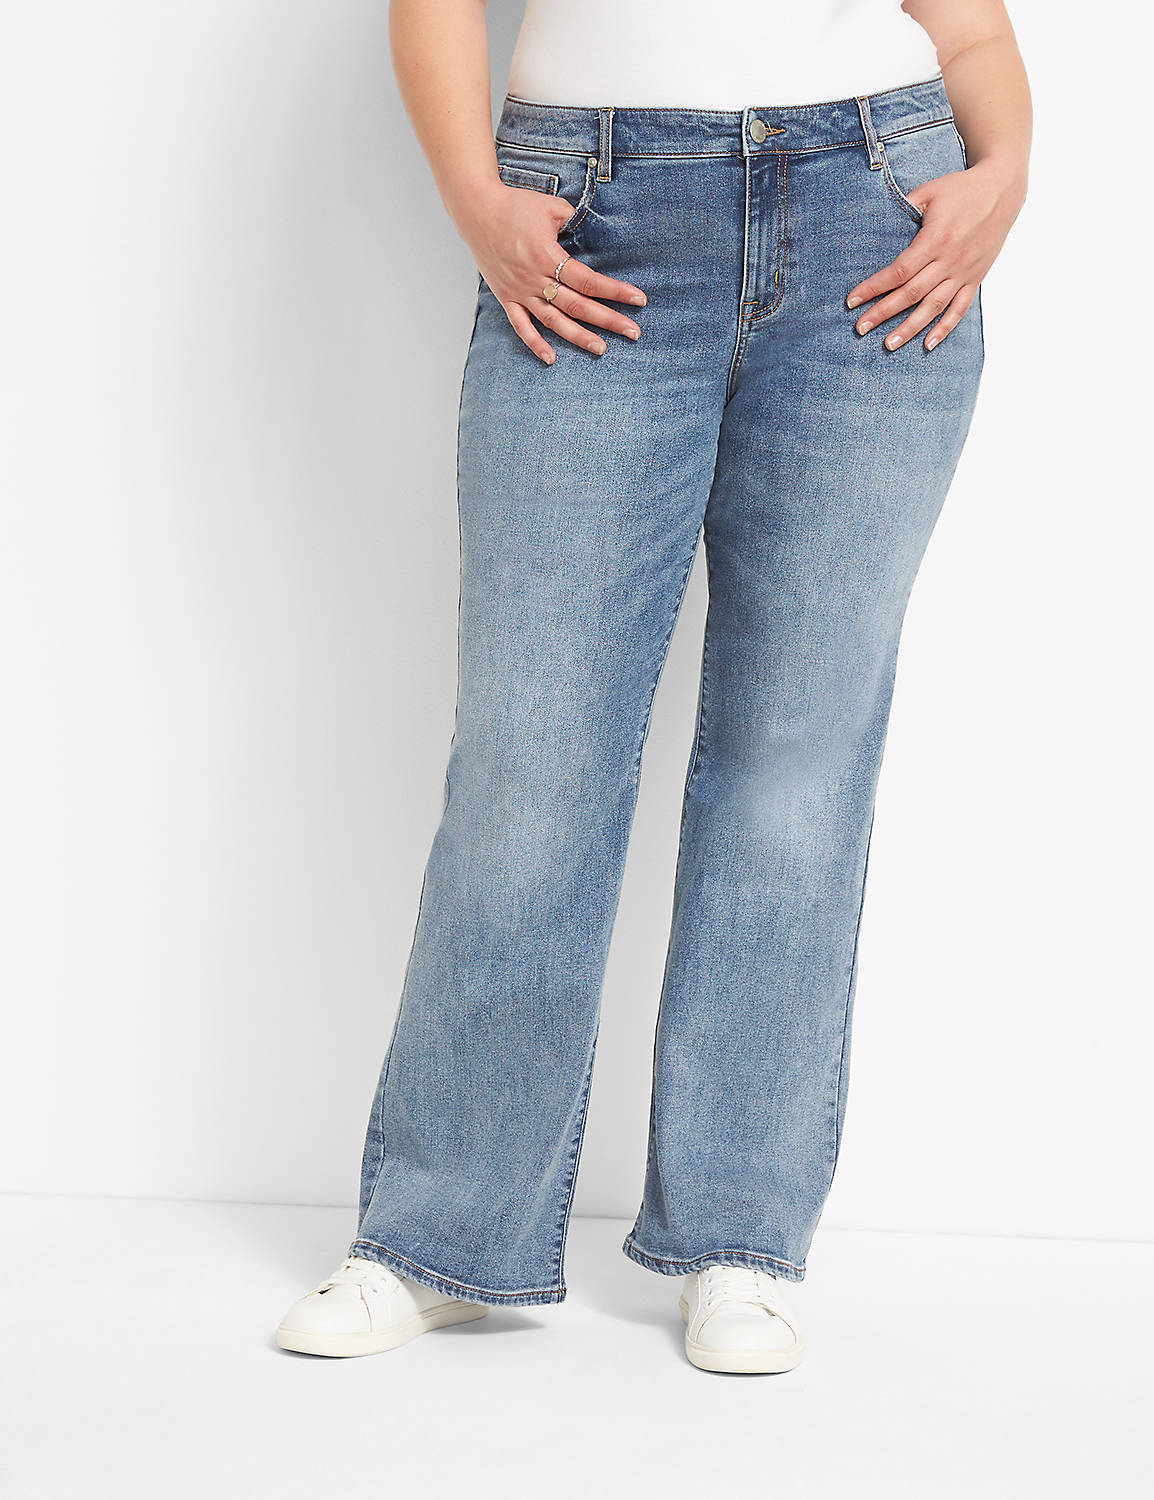 Signature Fit Cozy Boot Jean - Light Wash Product Image 1